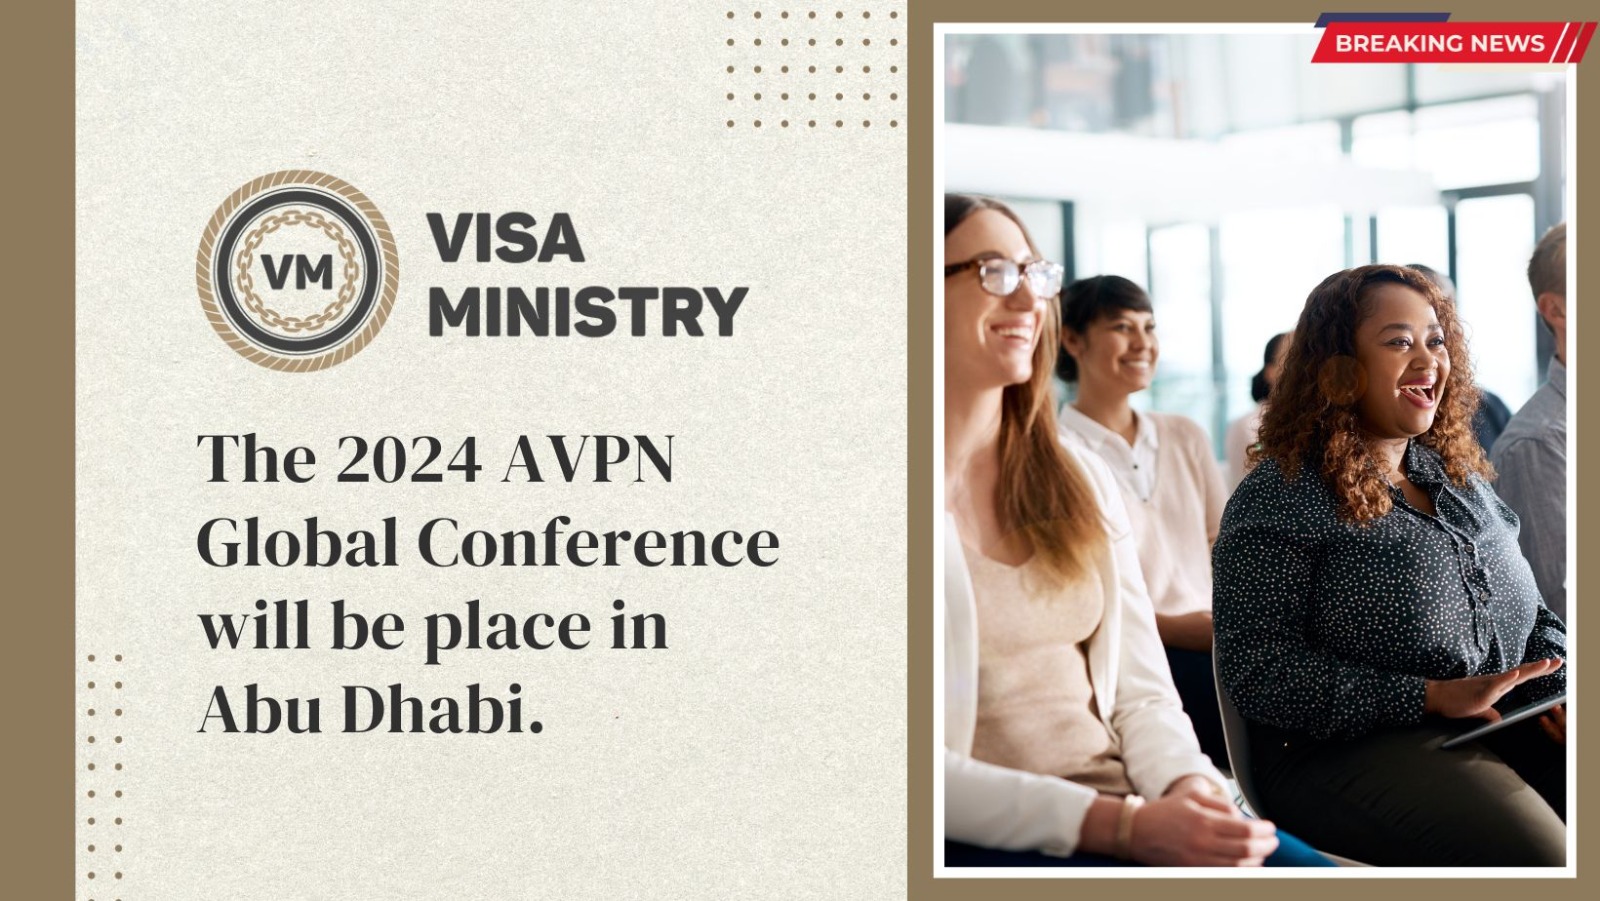 The 2024 AVPN Global Conference will be place in Abu Dhabi VISA MINISTRY